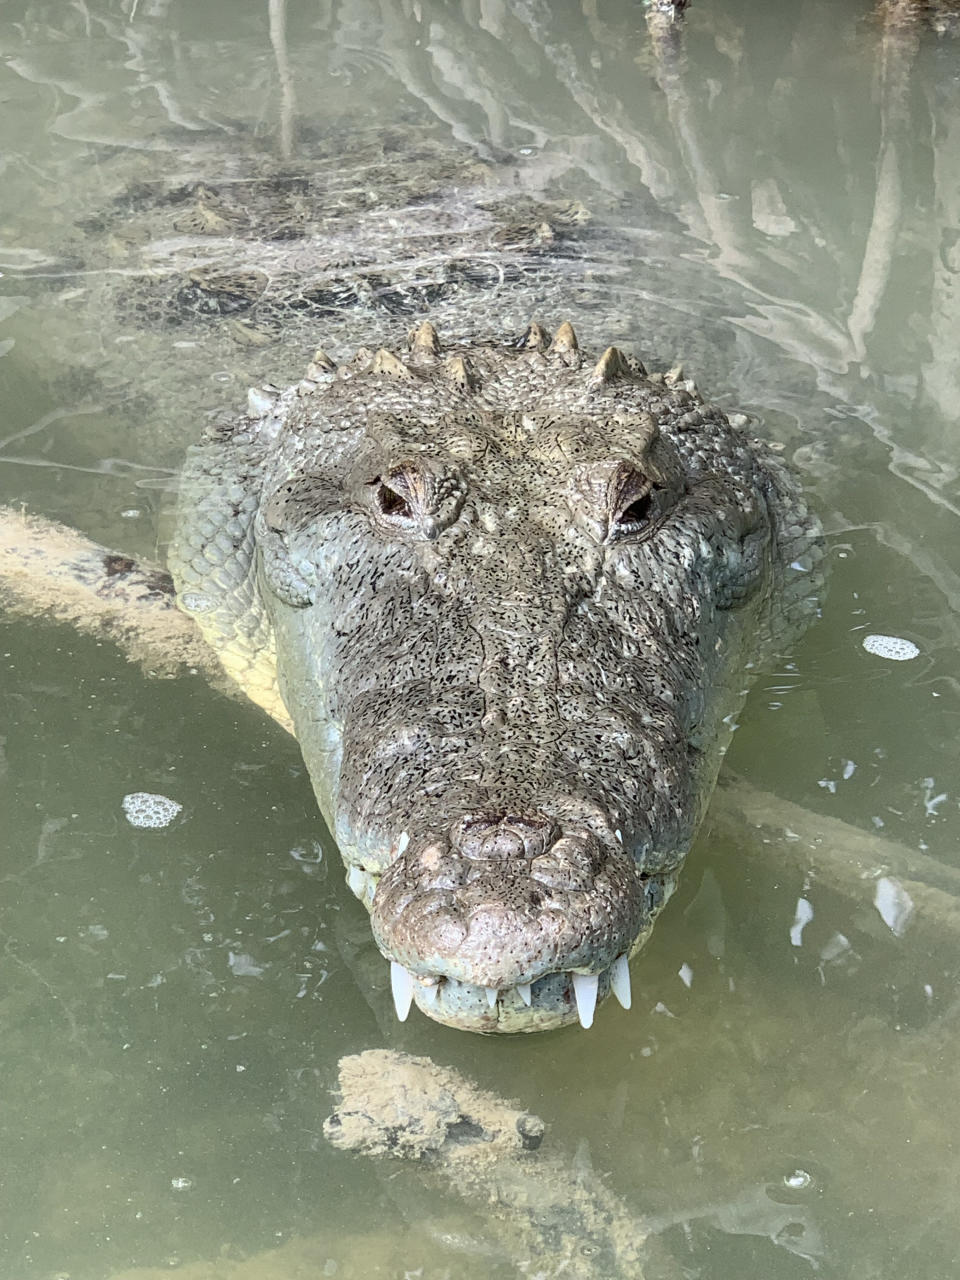 An image of an alligator's head popping above water, resting on a log